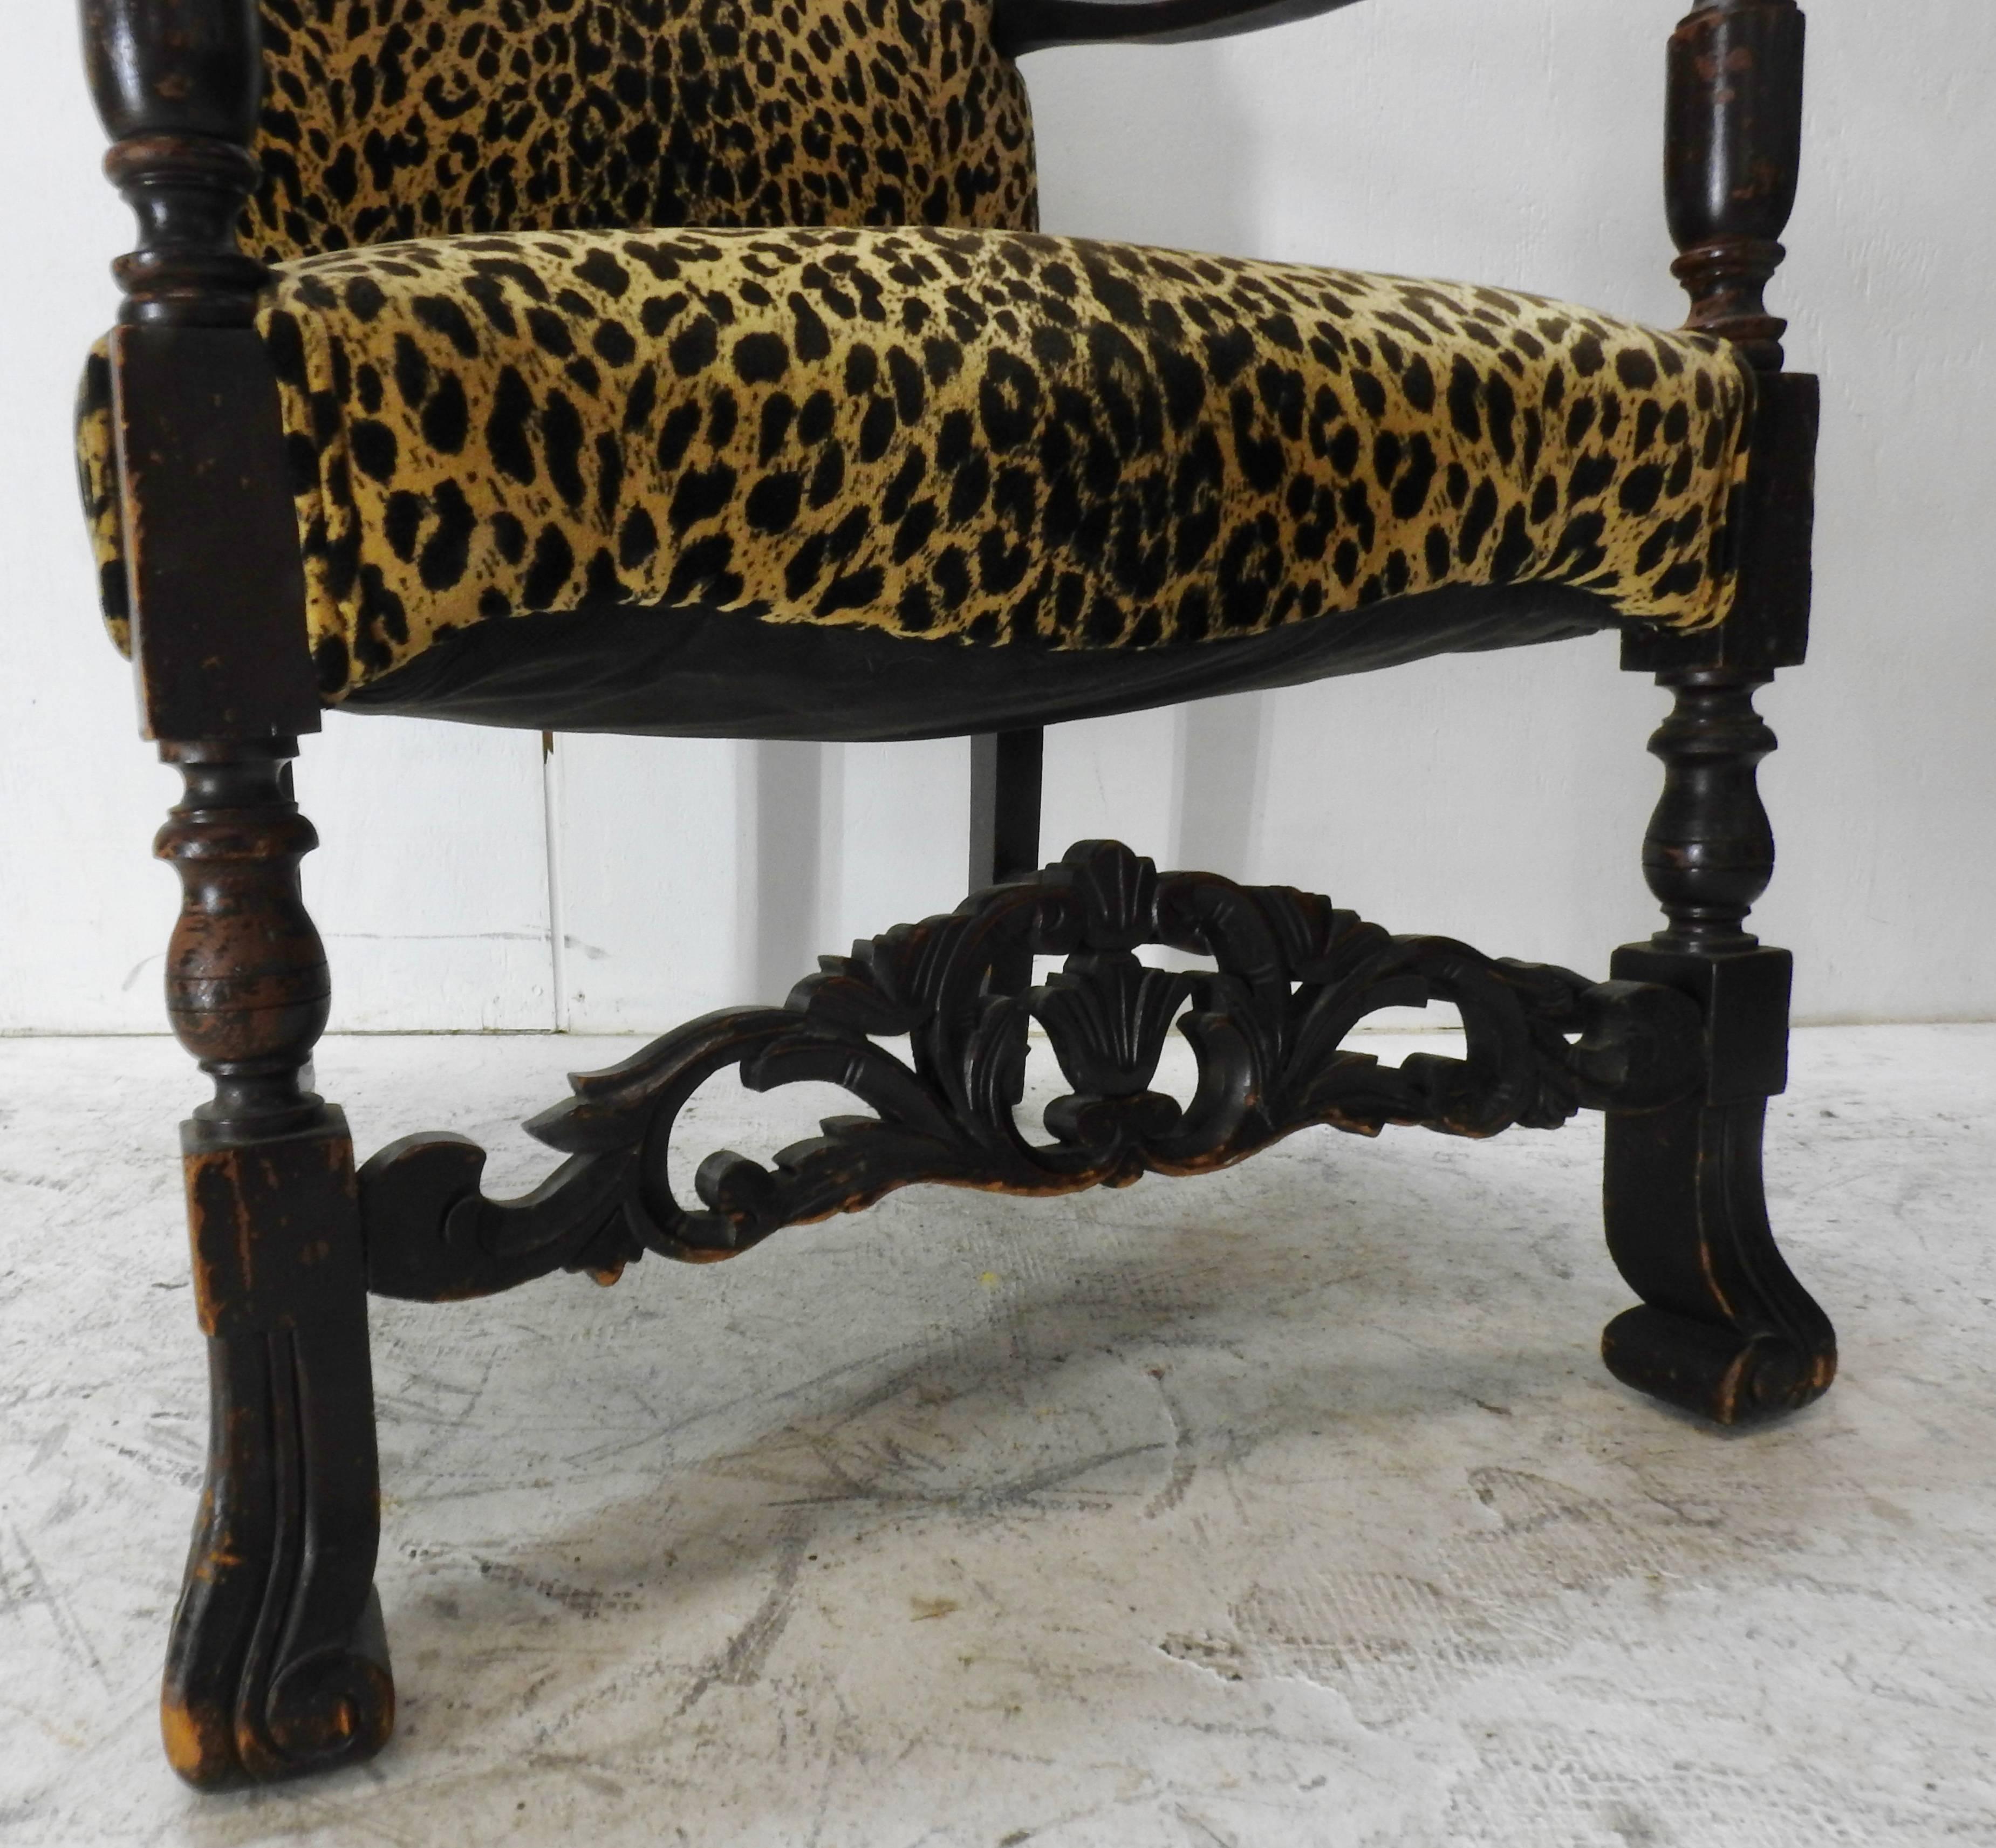 Renaissance Revival 19th Century German Hand-Carved High Back Chair with Leopard Print Upholstery